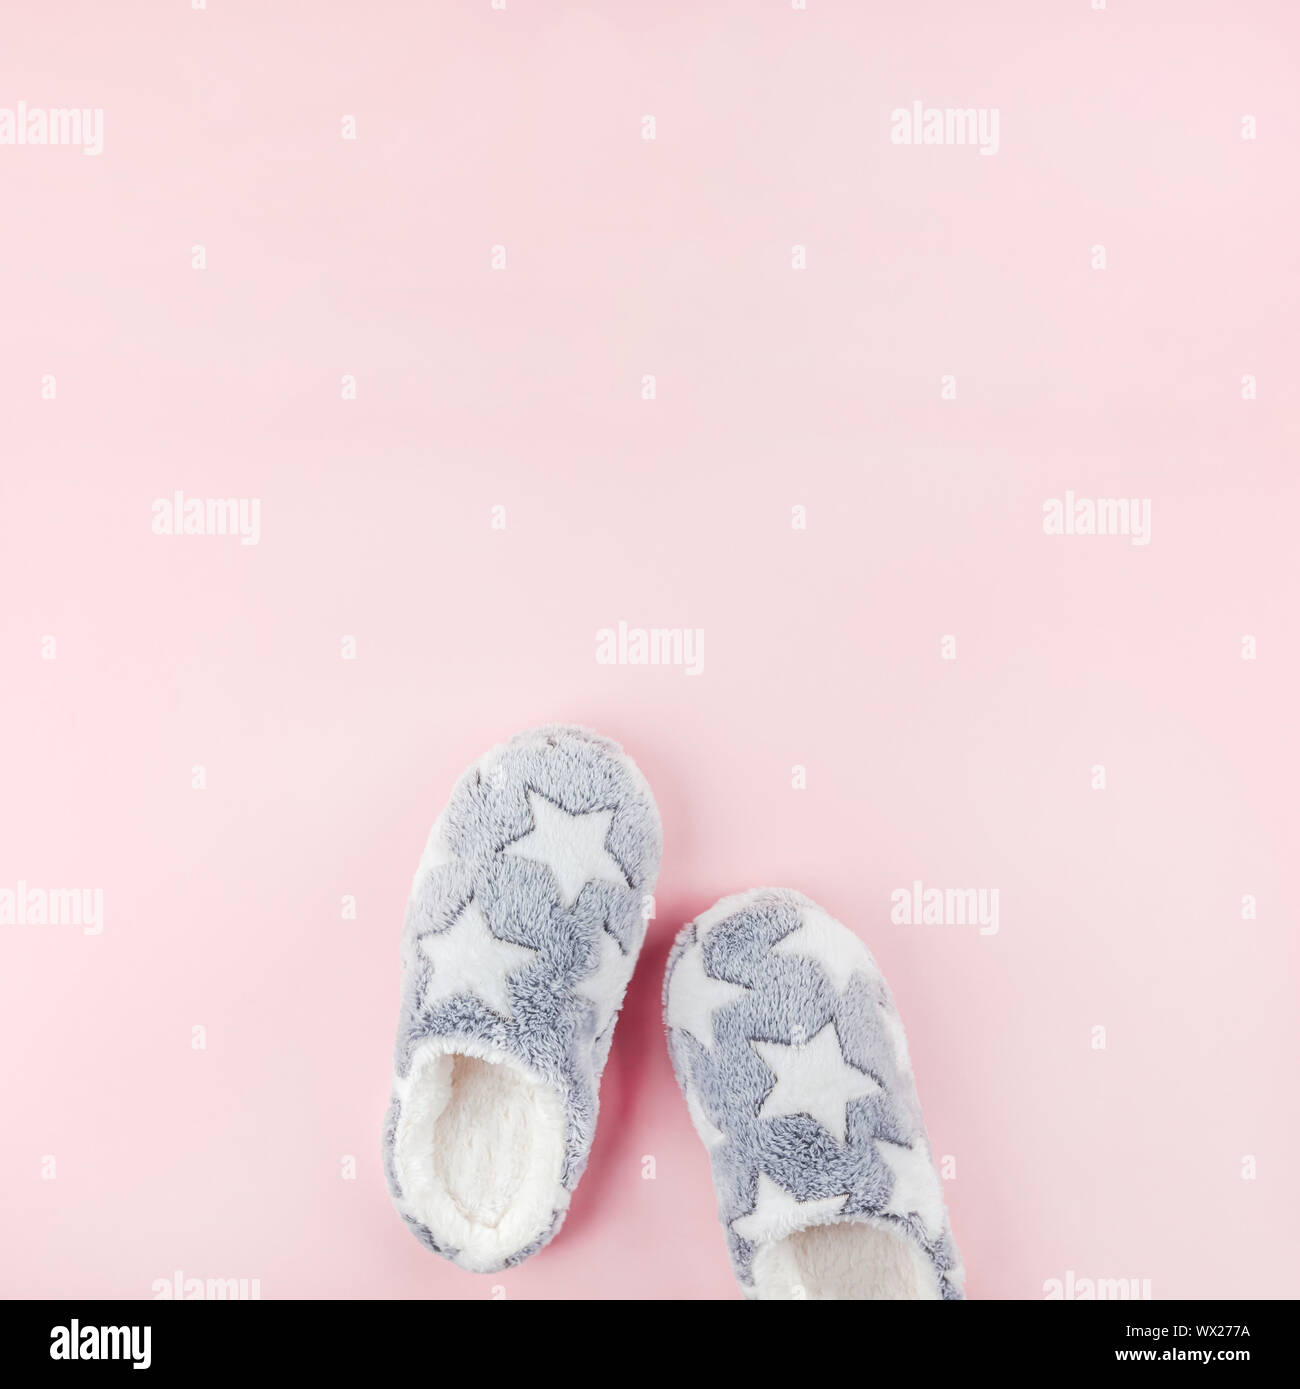 Sleep. Soft fluffy slippers on pink background. Creative conceptual top view flat lay in minimal style. Rest, good night, insomnia, relaxation, tired, Stock Photo